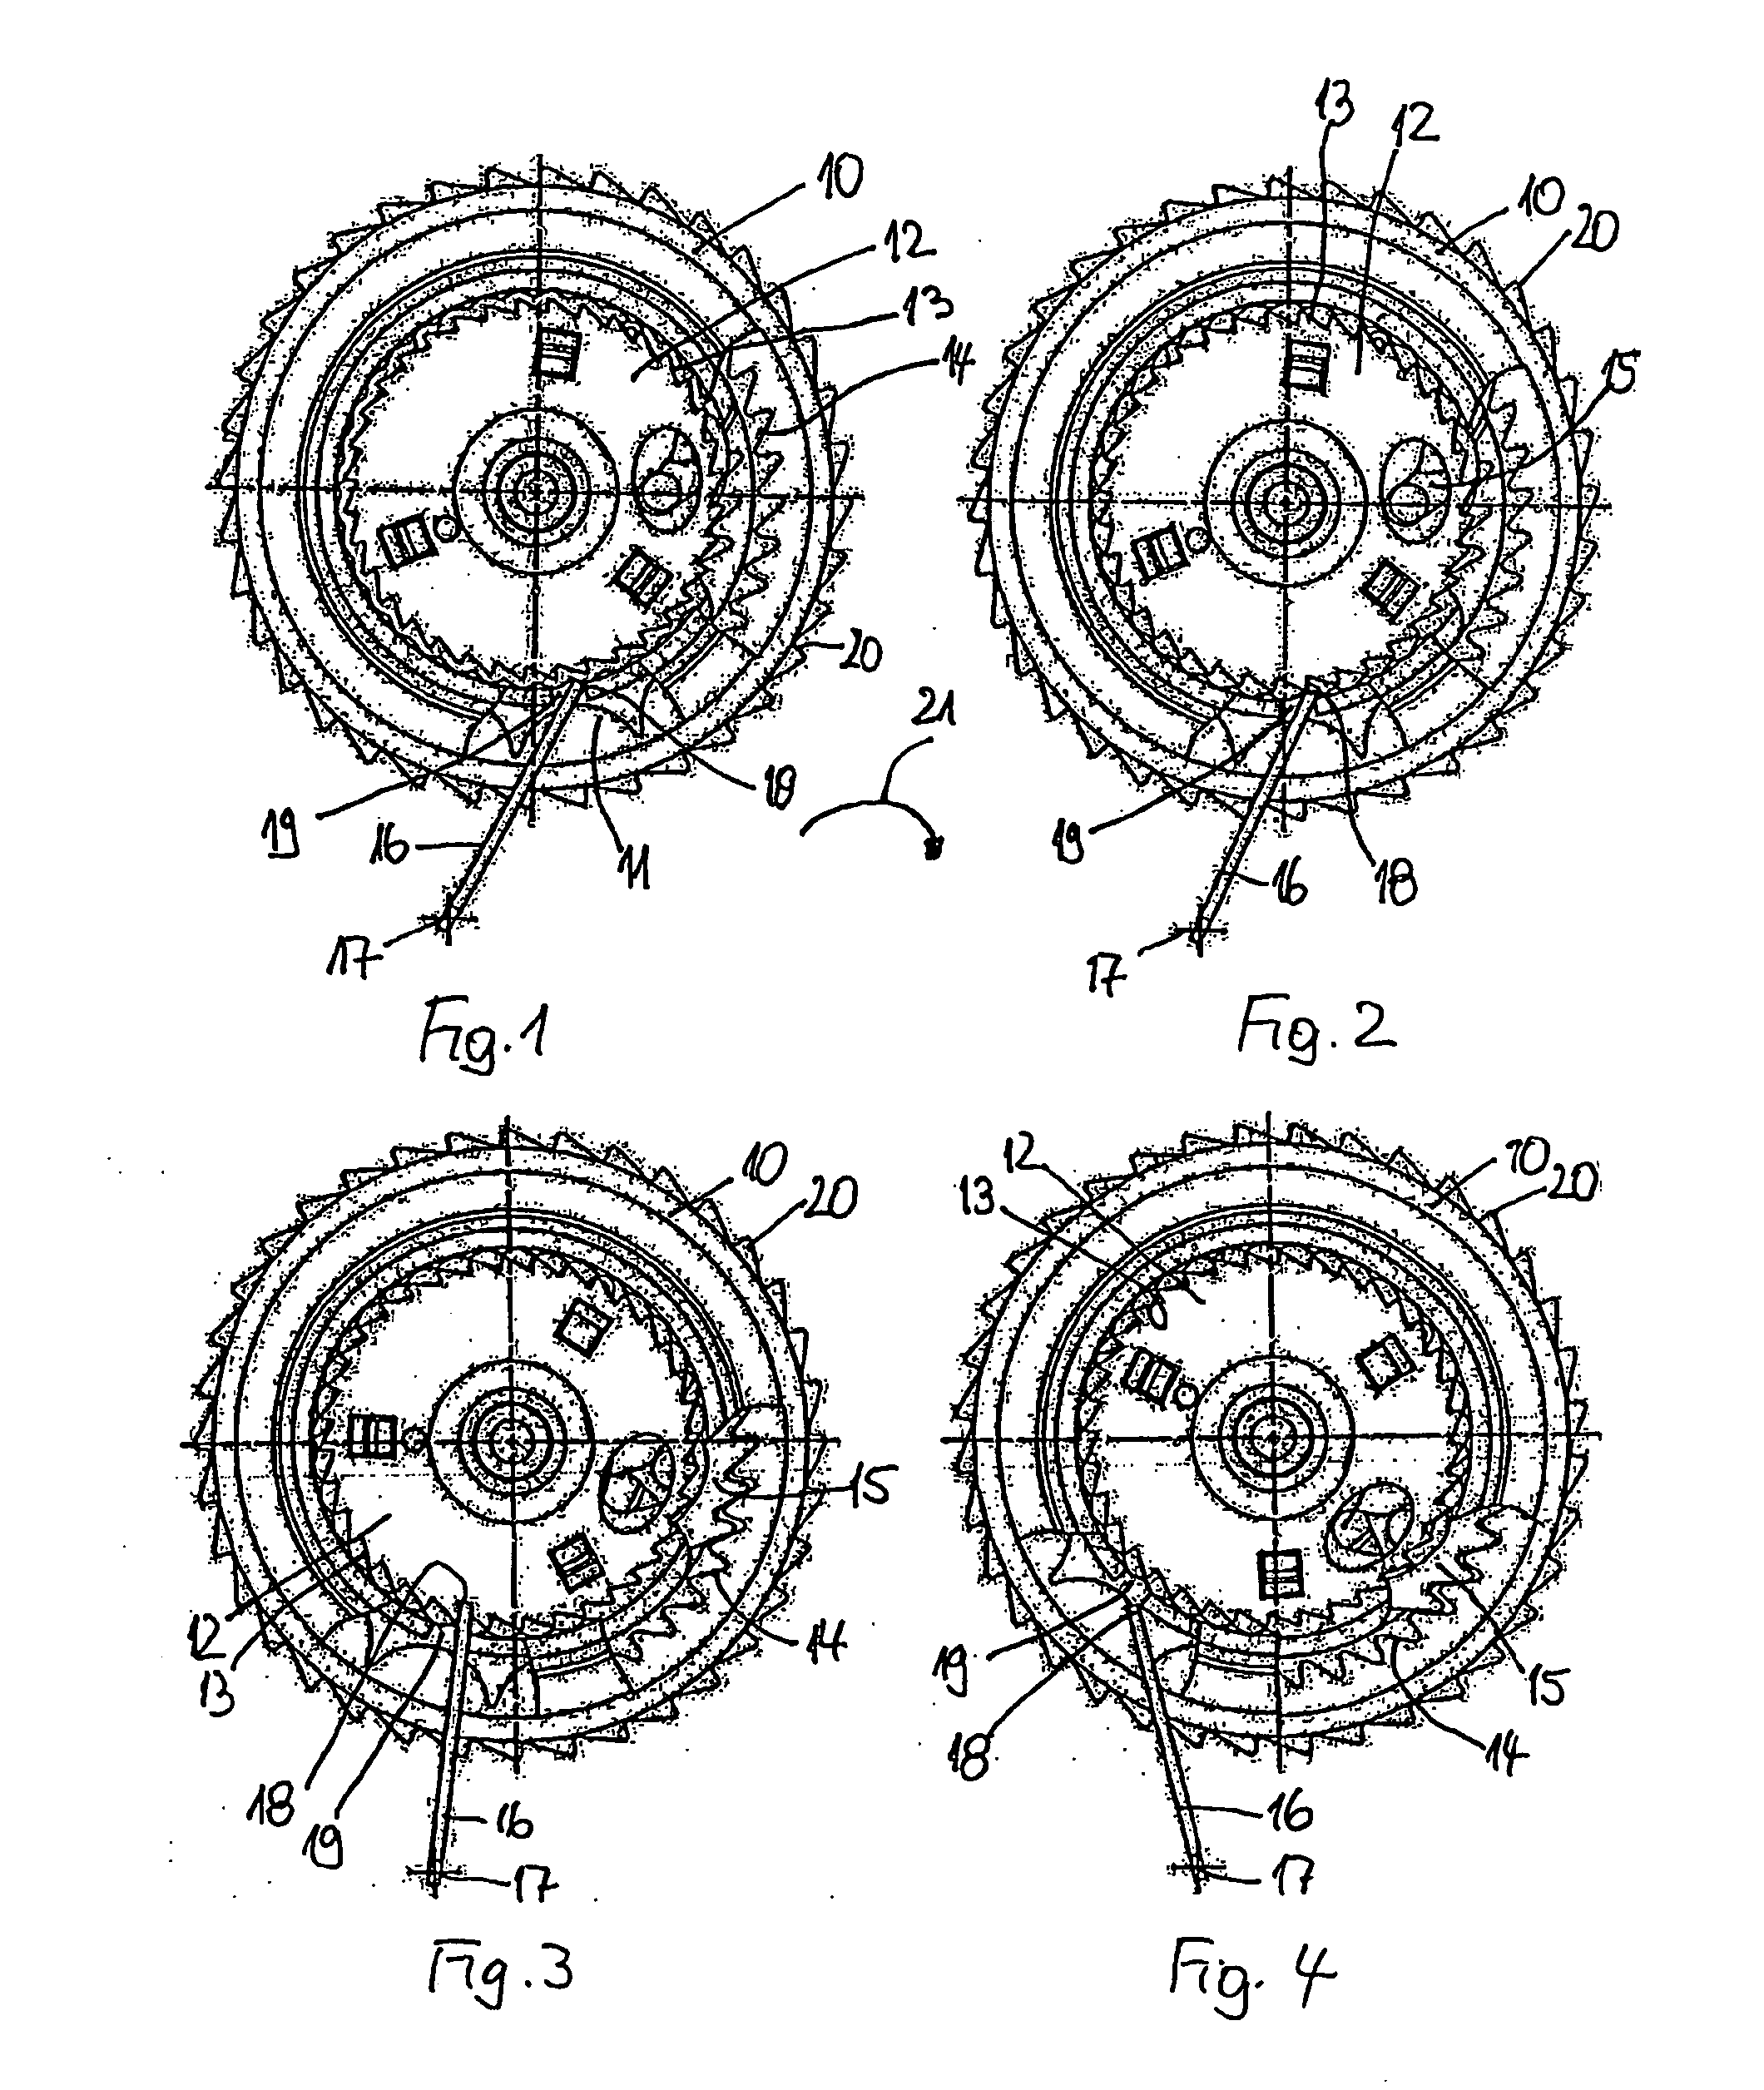 Coupling System Between Pre-Tensioning Wheel and Seat Belt Retainer Spool